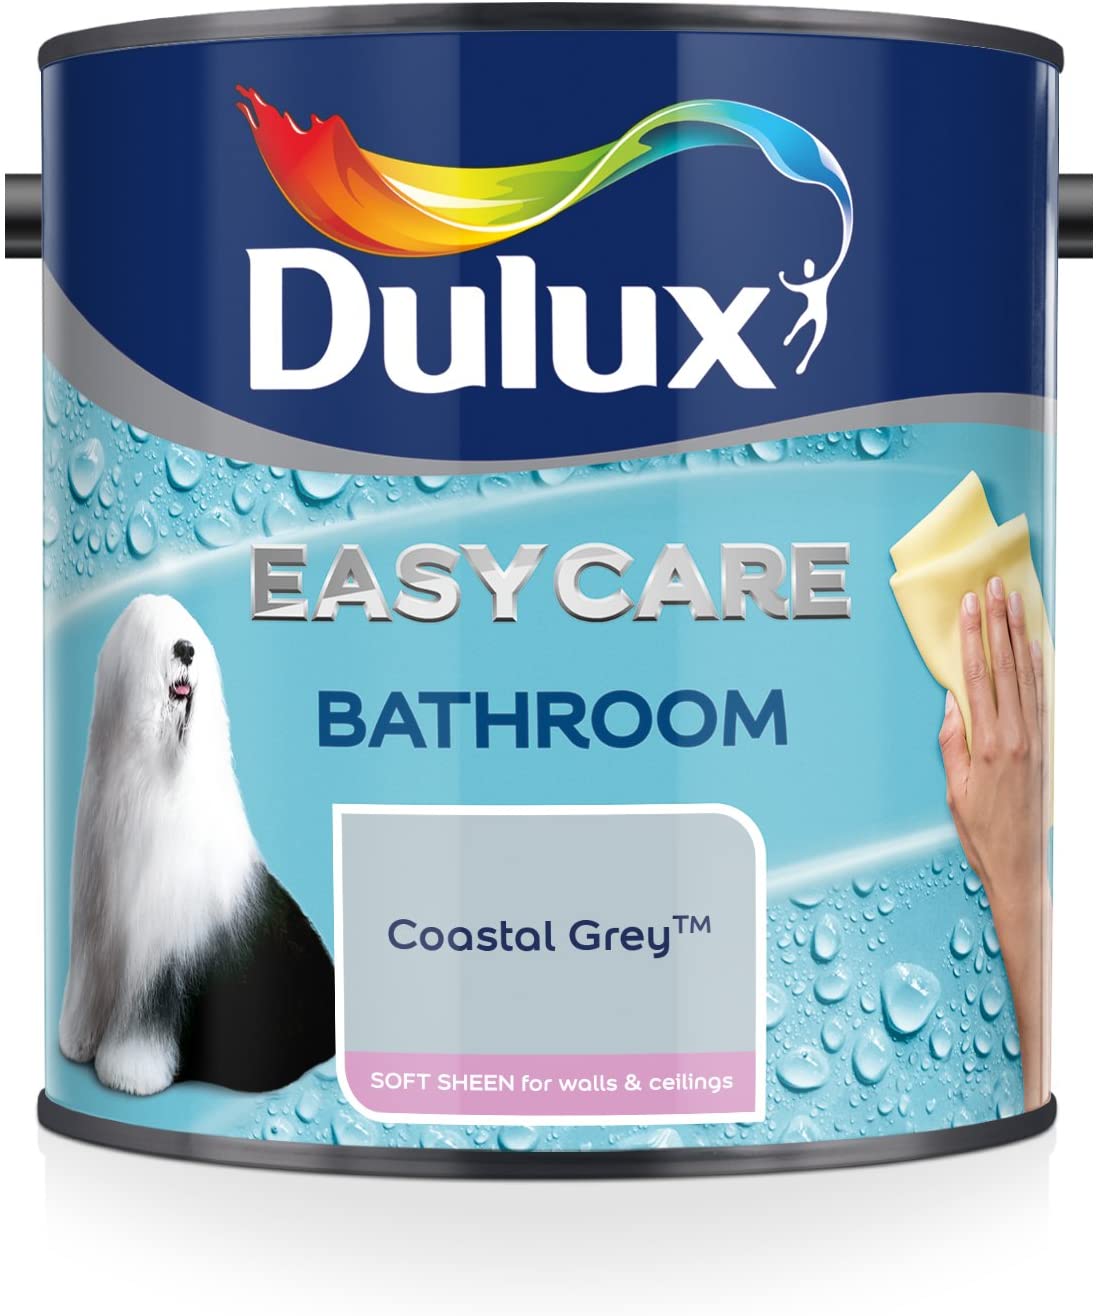 Dulux-Easycare-Bathroom-Soft-Sheen-Emulsion-Paint-For-Walls-And-Ceilings-Coastal-Grey-2.5L